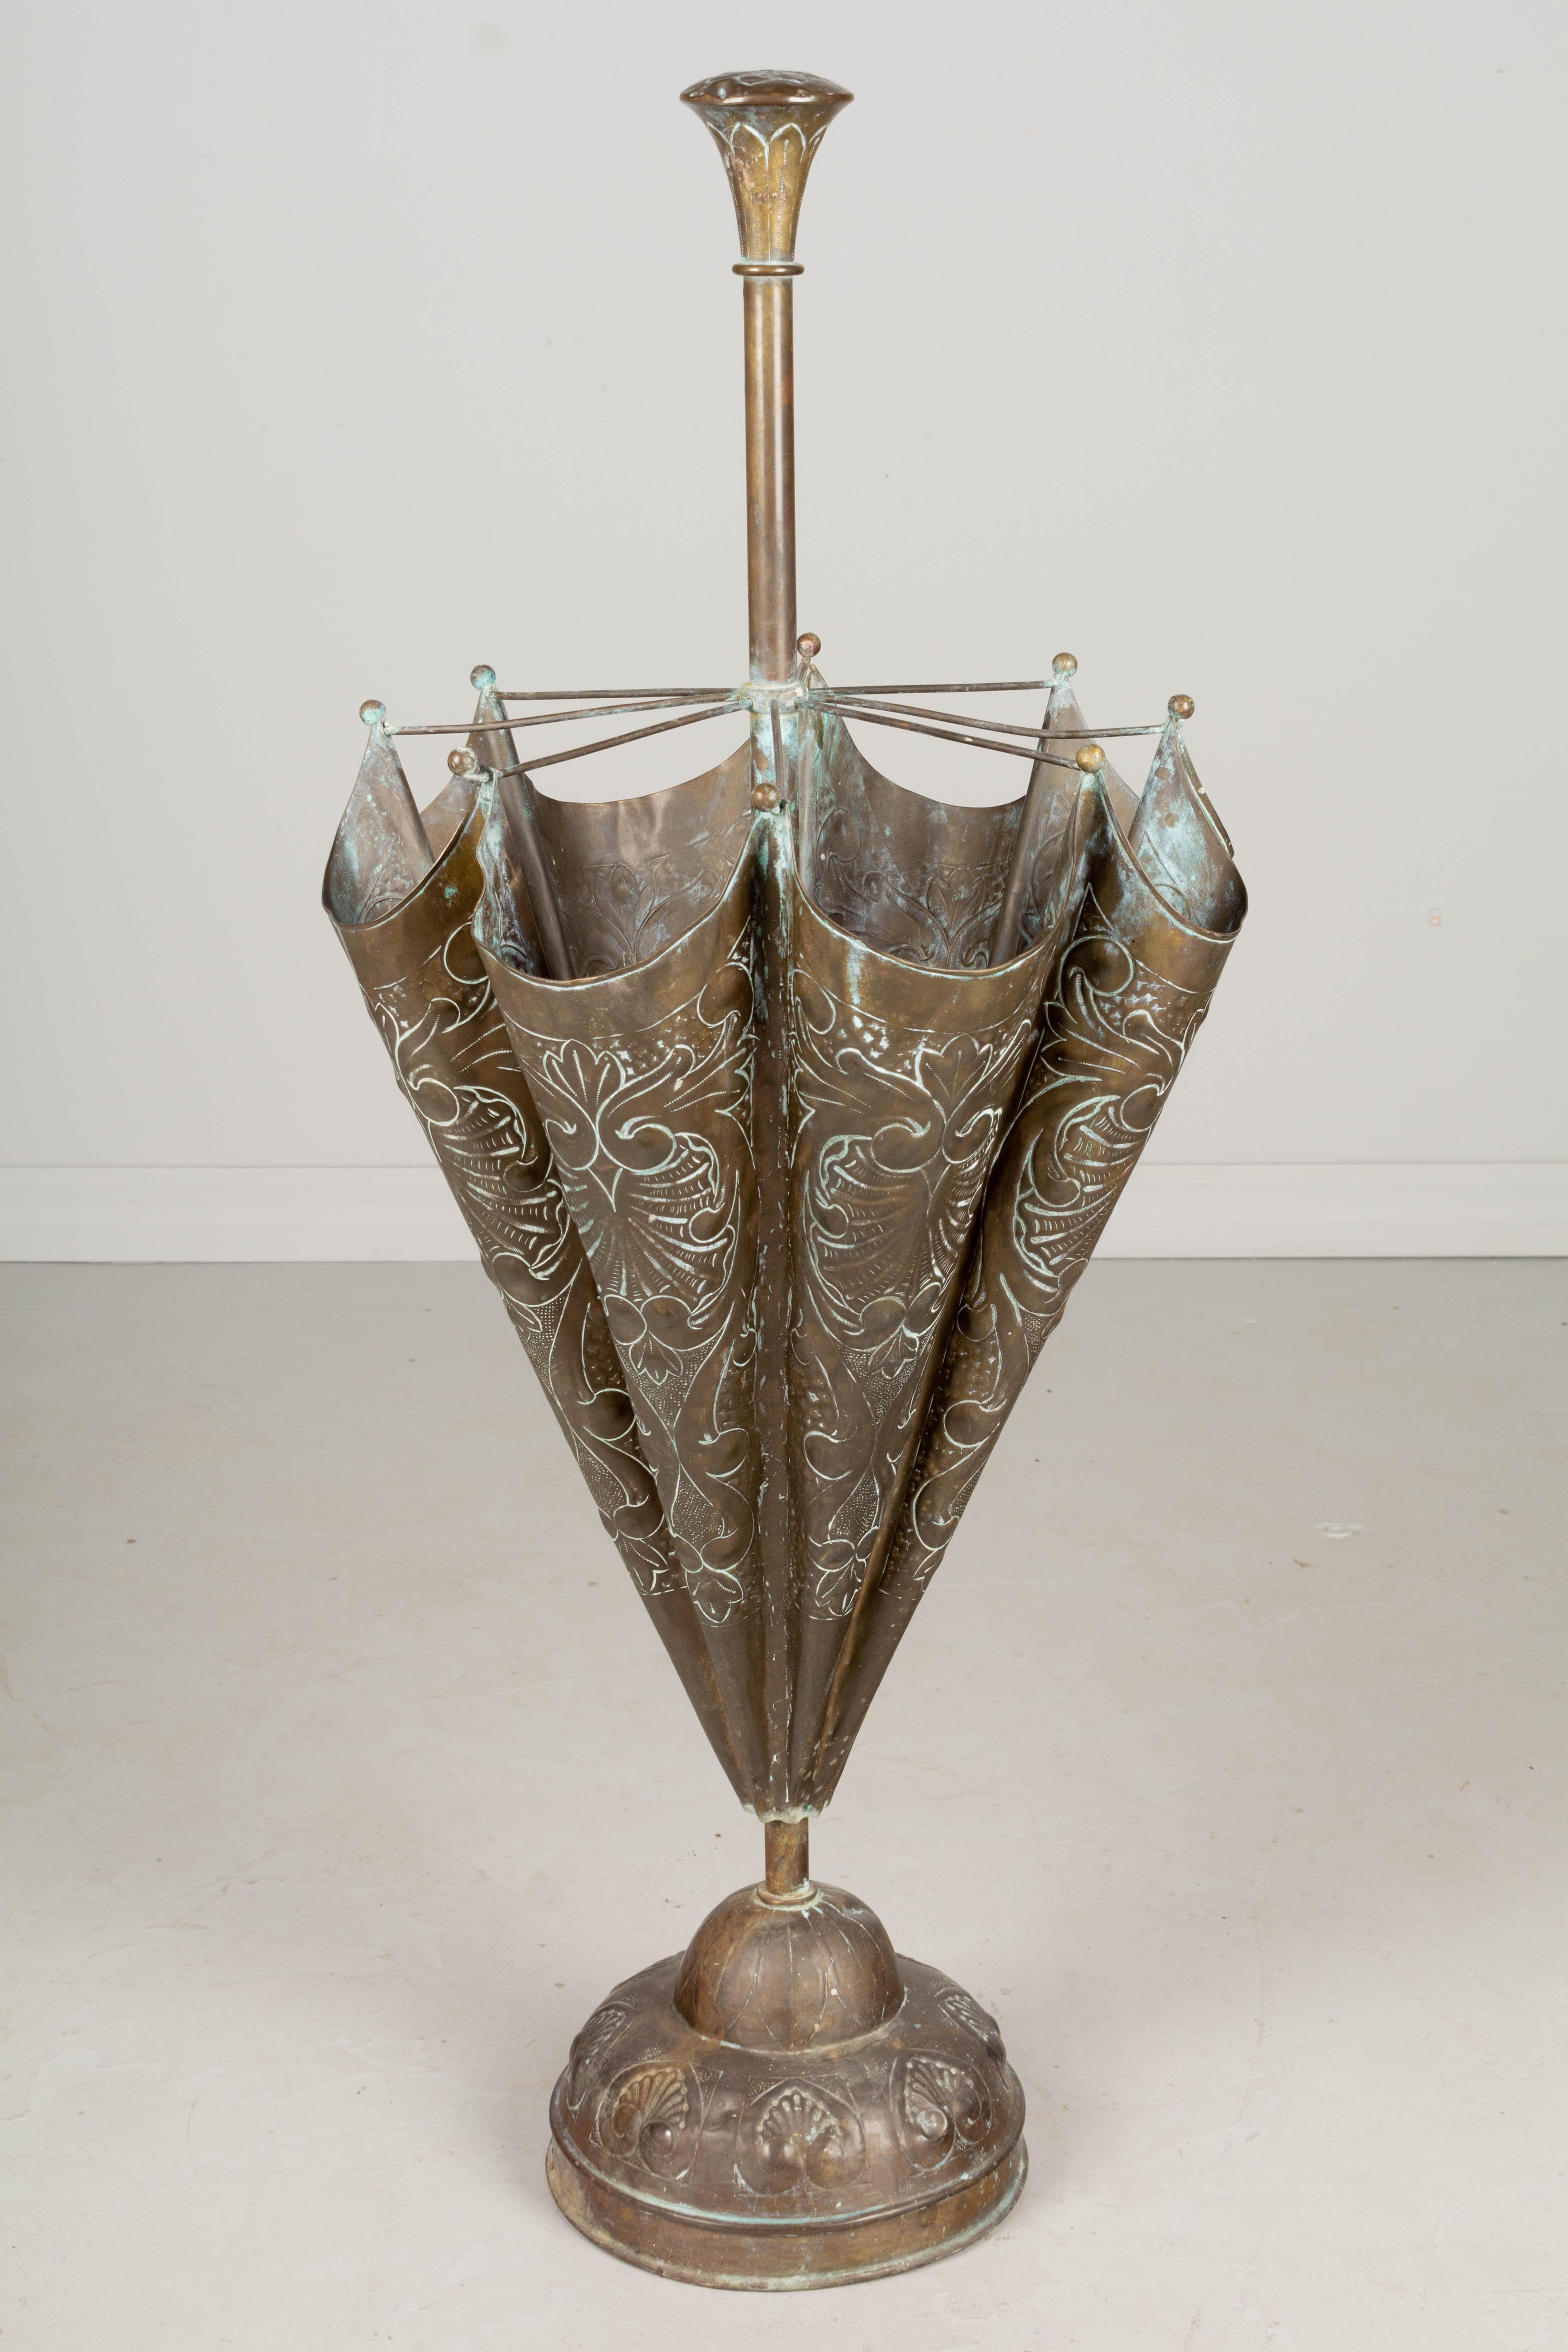 A French embossed brass umbrella stand with nice verdigris patina. Minor dents. Circa 1900. 40